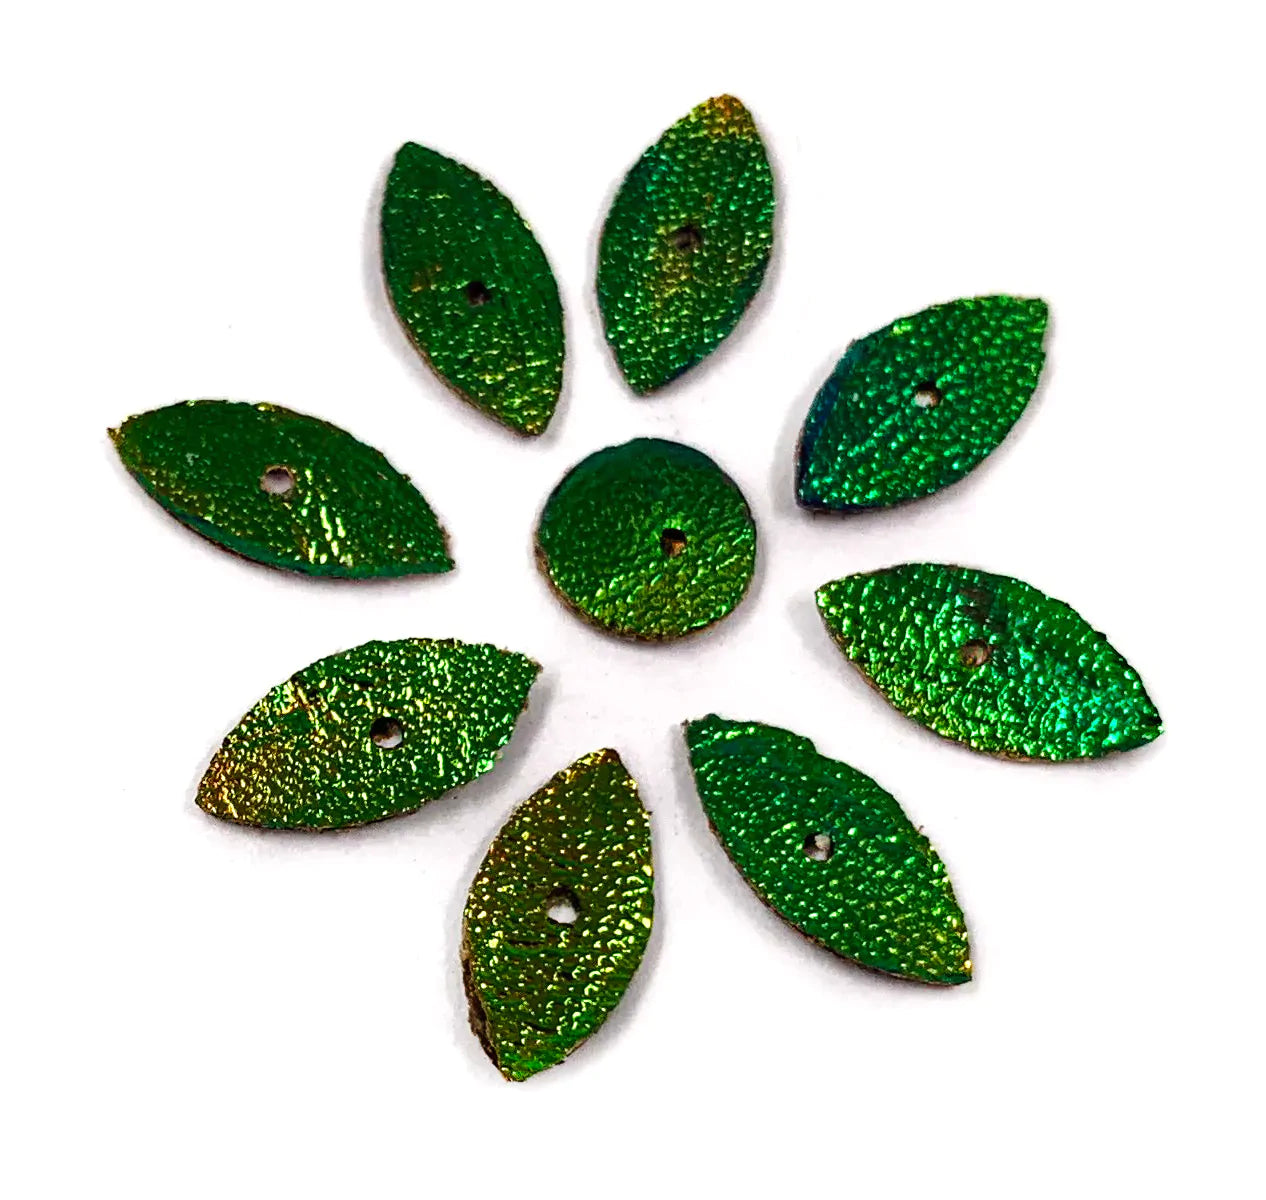 Jewel Beetle Wings UNDRILLED NO-HOLE 100 Pcs Natural Wings - Circle 4 MM